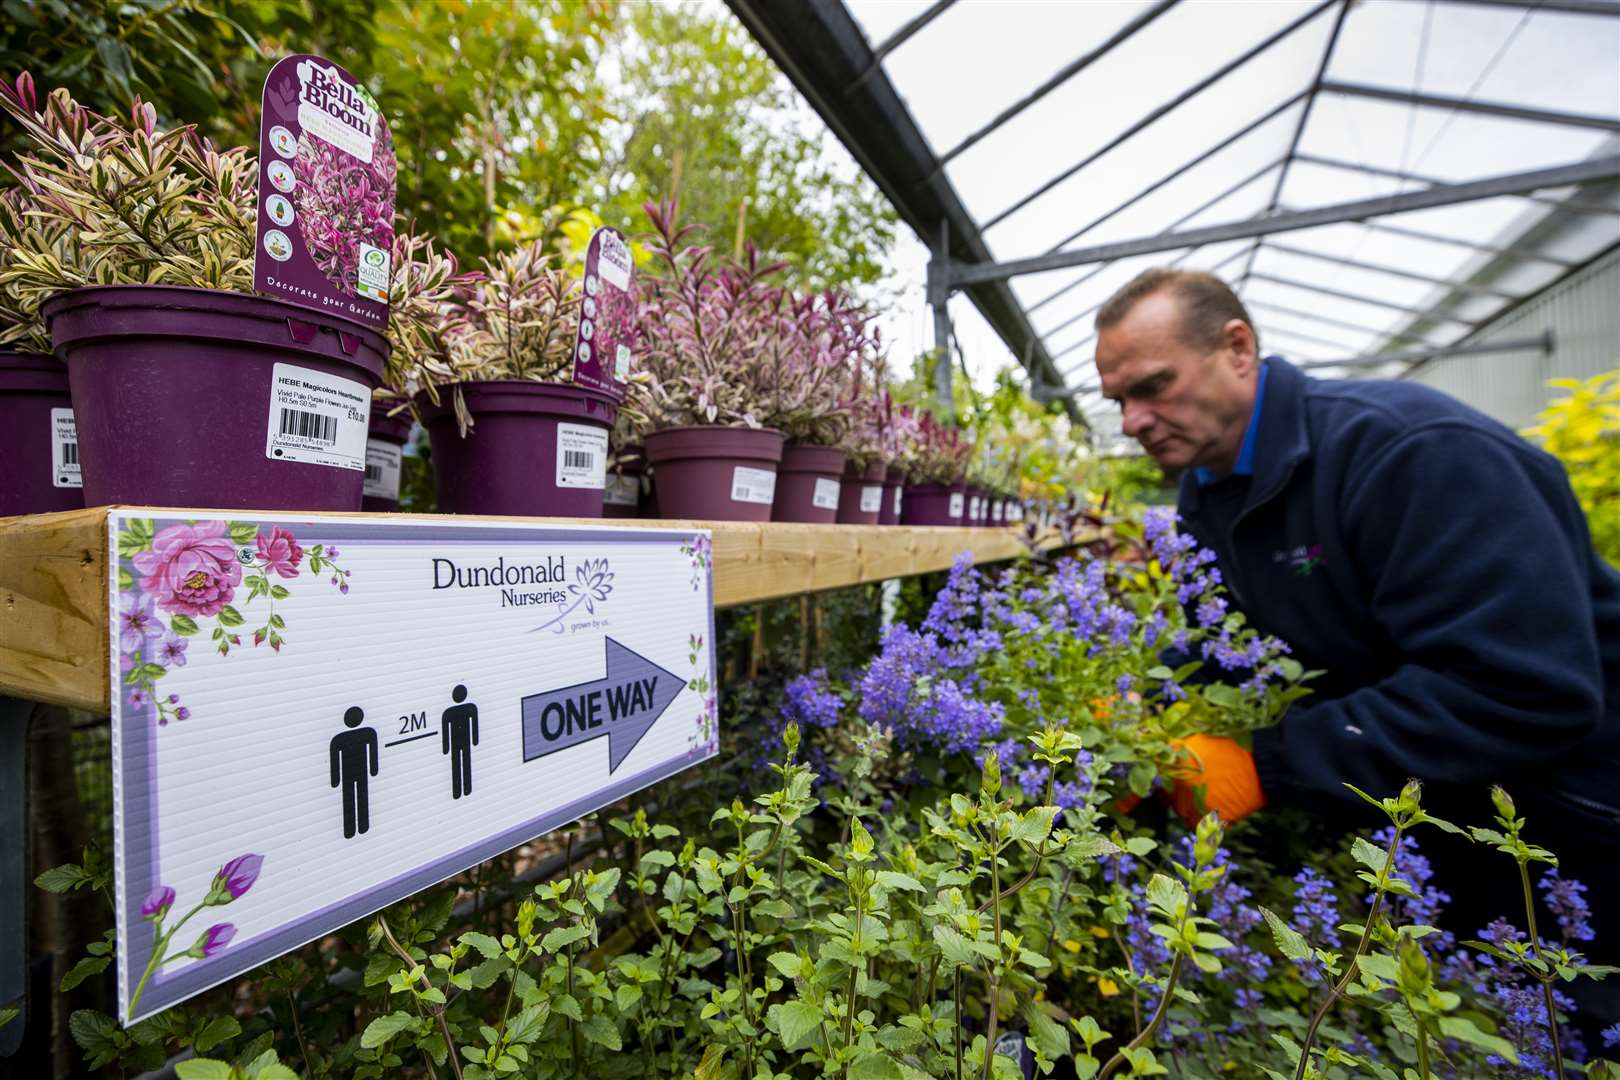 Worker Steven McFarland picking flowers for home delivery at Dundonald Nurseries in Belfast (Liam McBurney/PA)